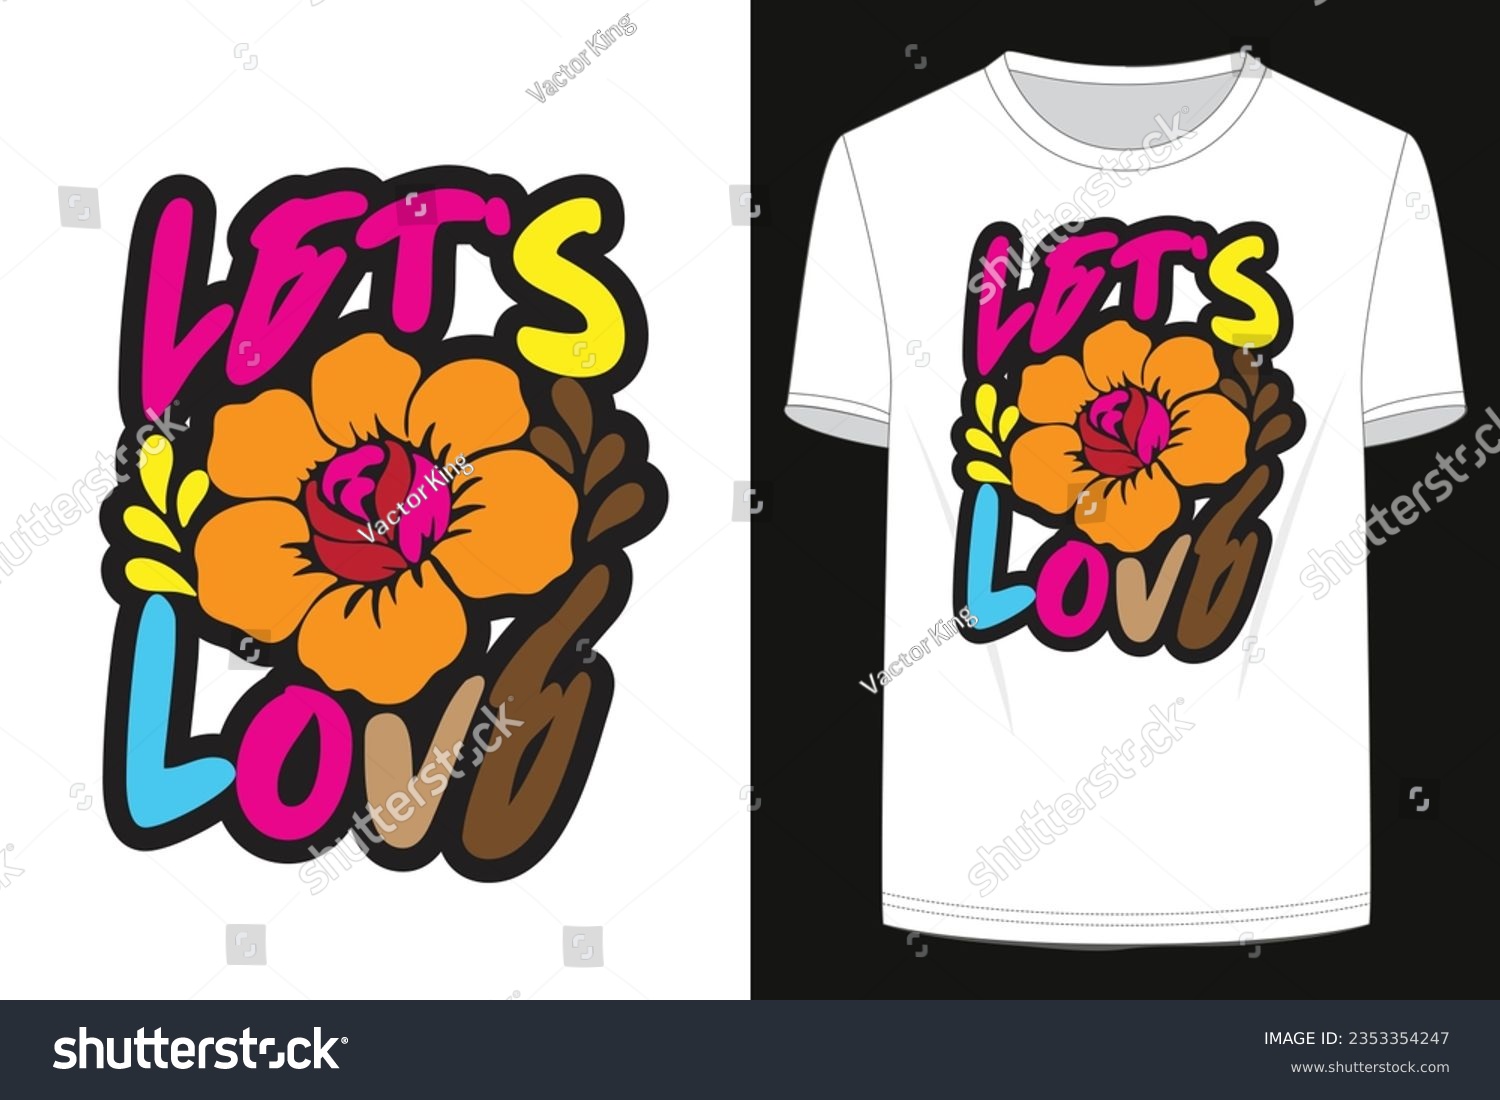 SVG of White tee shirt design with slogan Lets love, elements flowers and leaf. svg